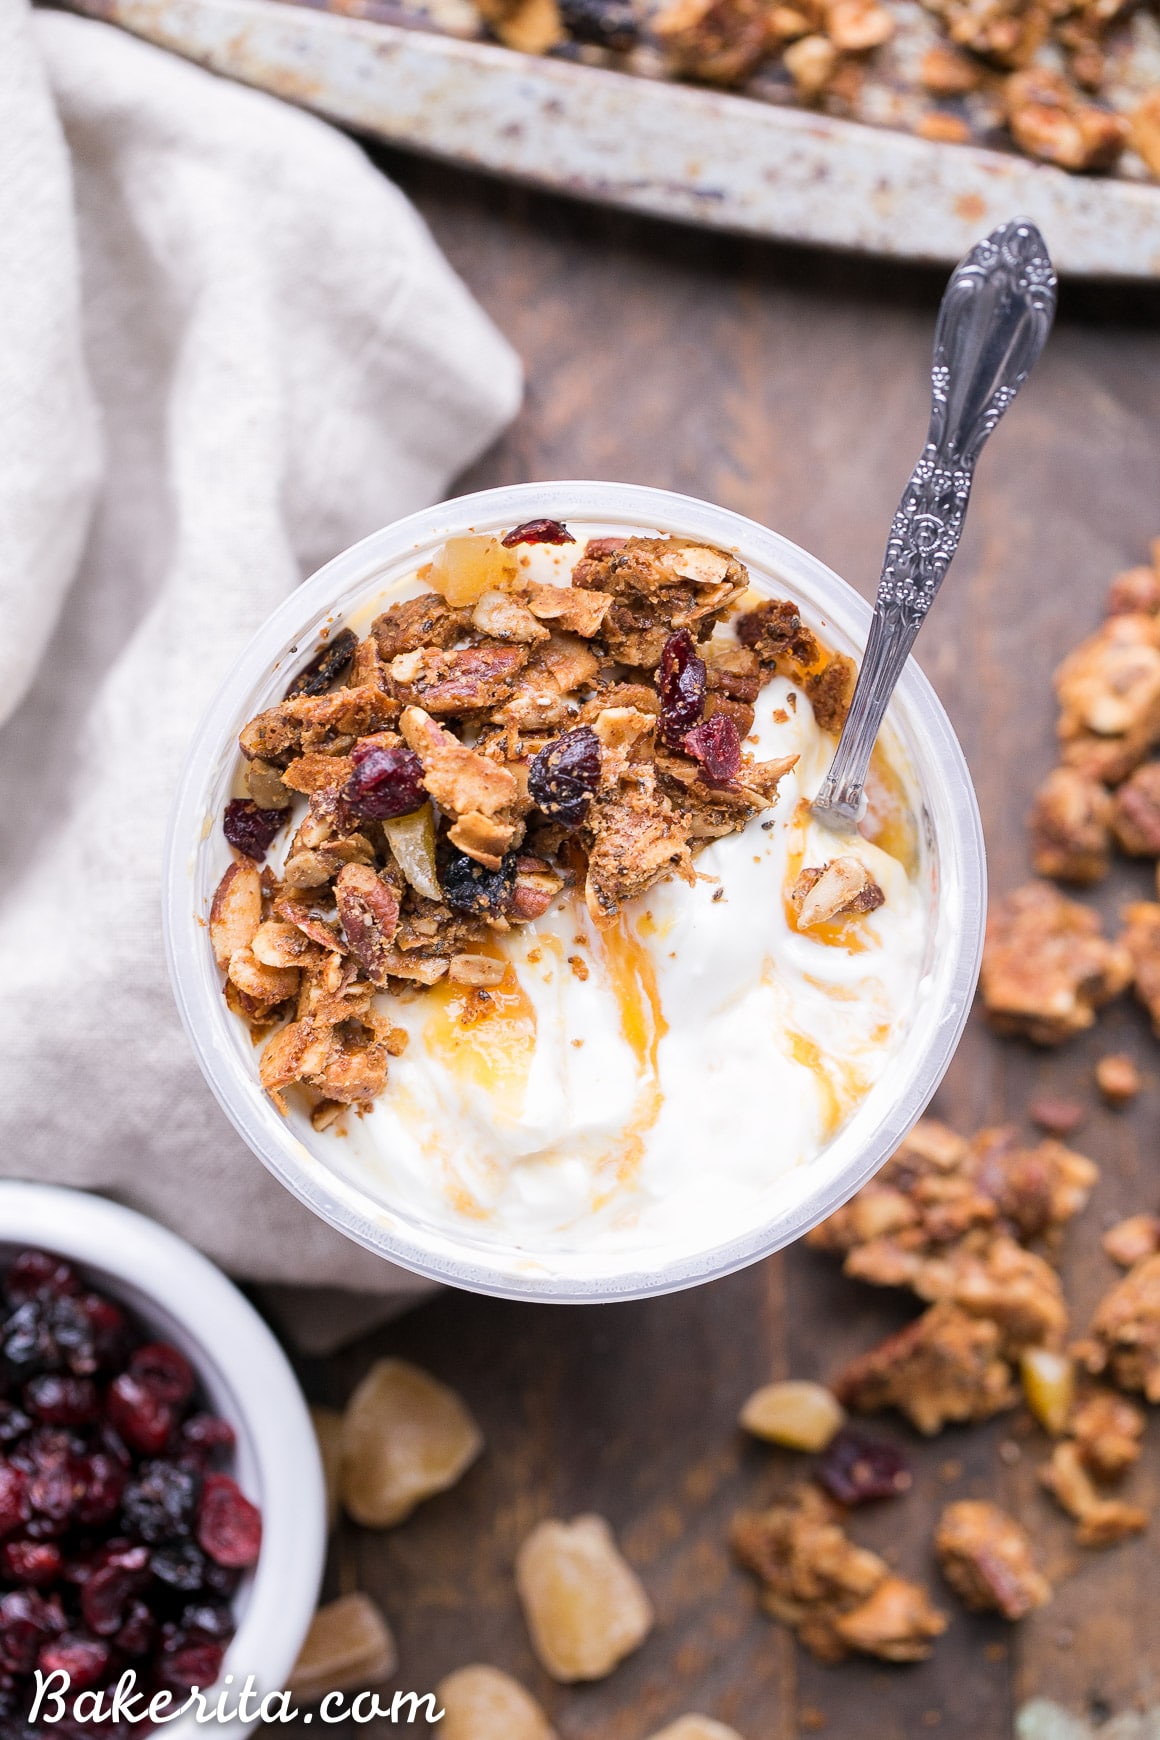 Orange Ginger Grain-Free Granola is crunchy, flavorful, and incredibly delicious - you definitely won't miss the oats! This gluten-free, Paleo and vegan granola makes the perfect breakfast or snack.